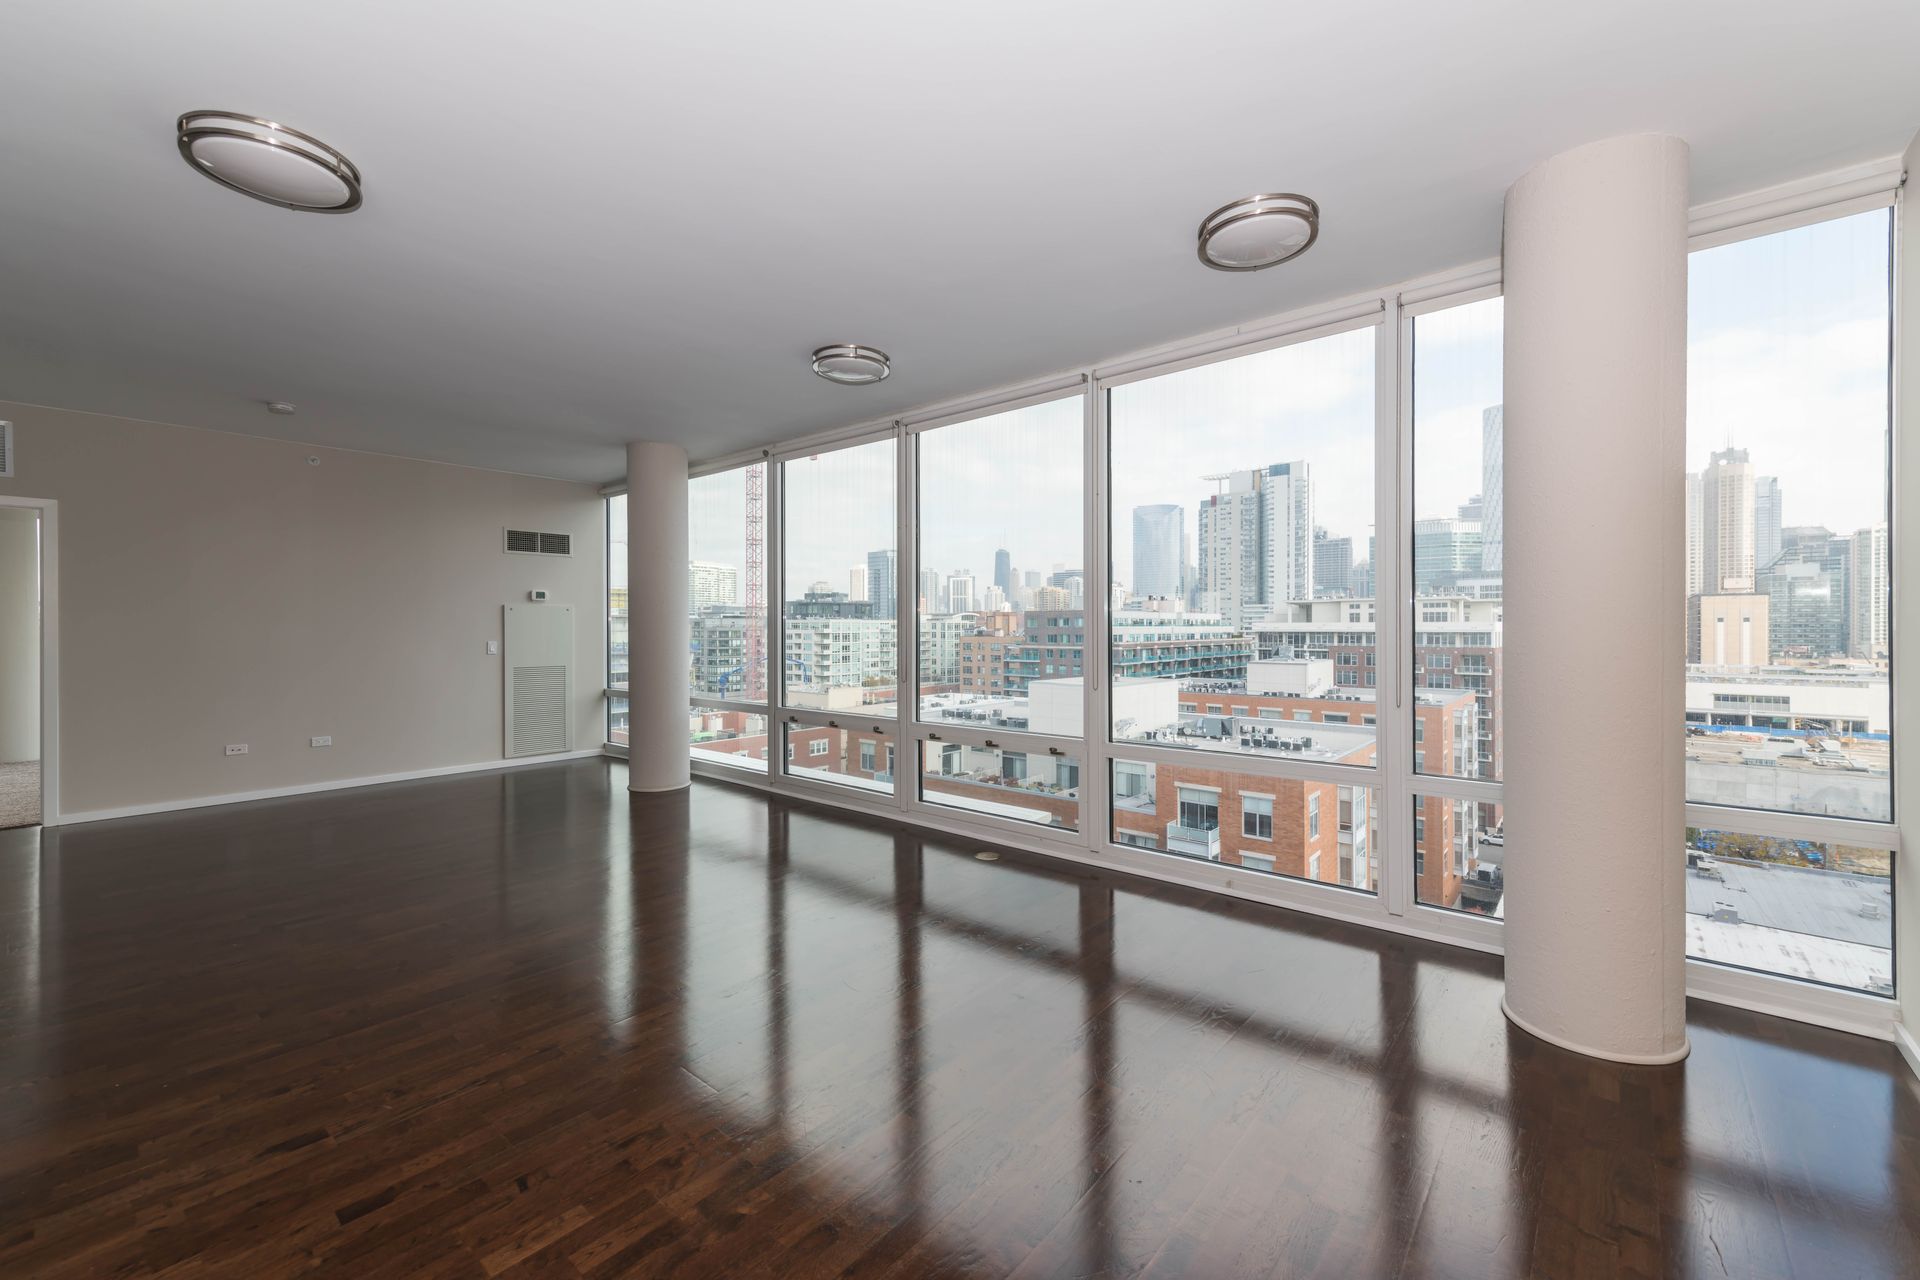 An empty apartment with lots of windows and a view of the city at 24 S Morgan Apartments.